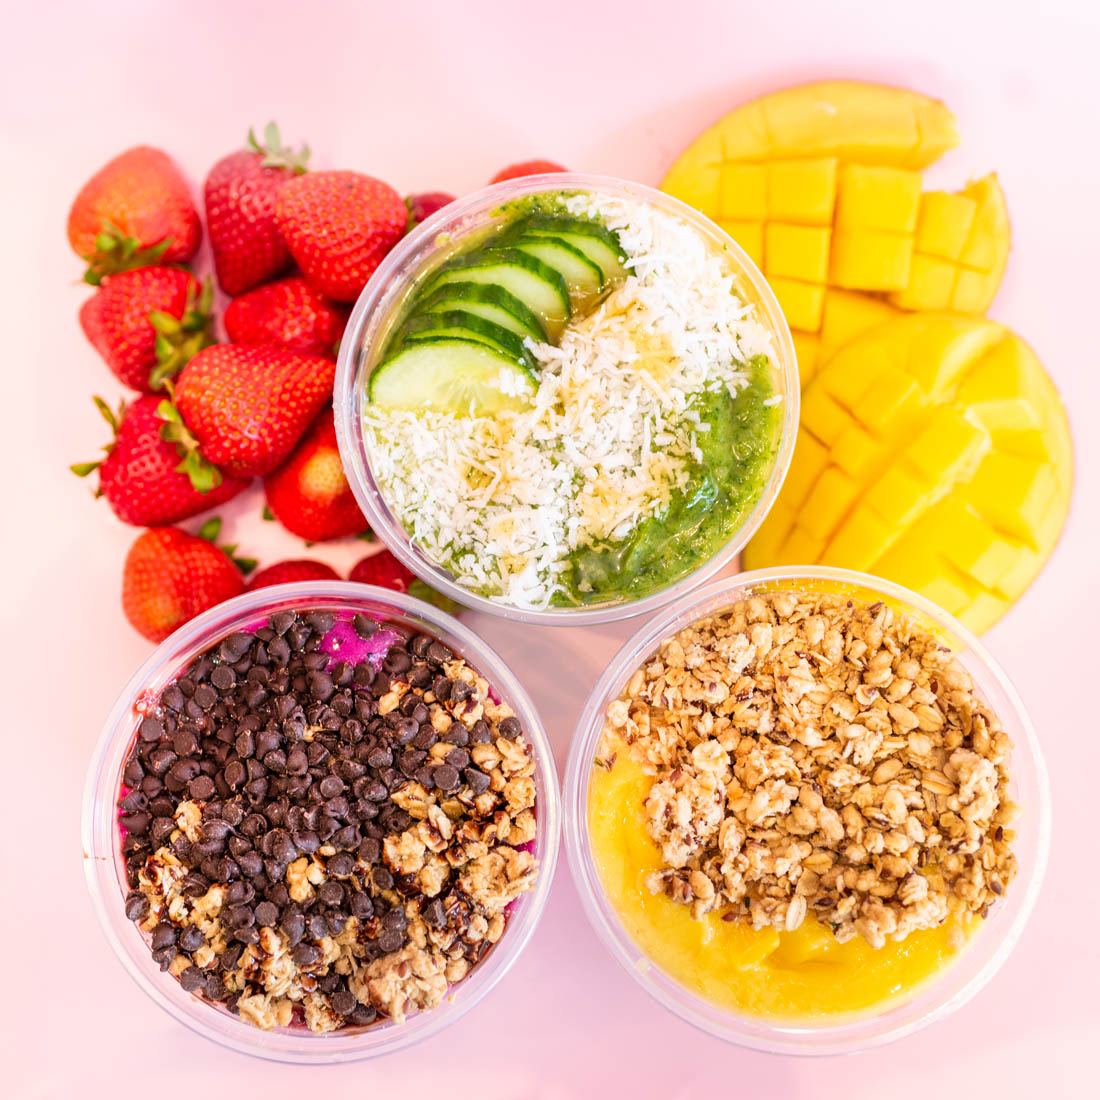 Rush Bowls smoothie bowls nutrition info in St. Louis.